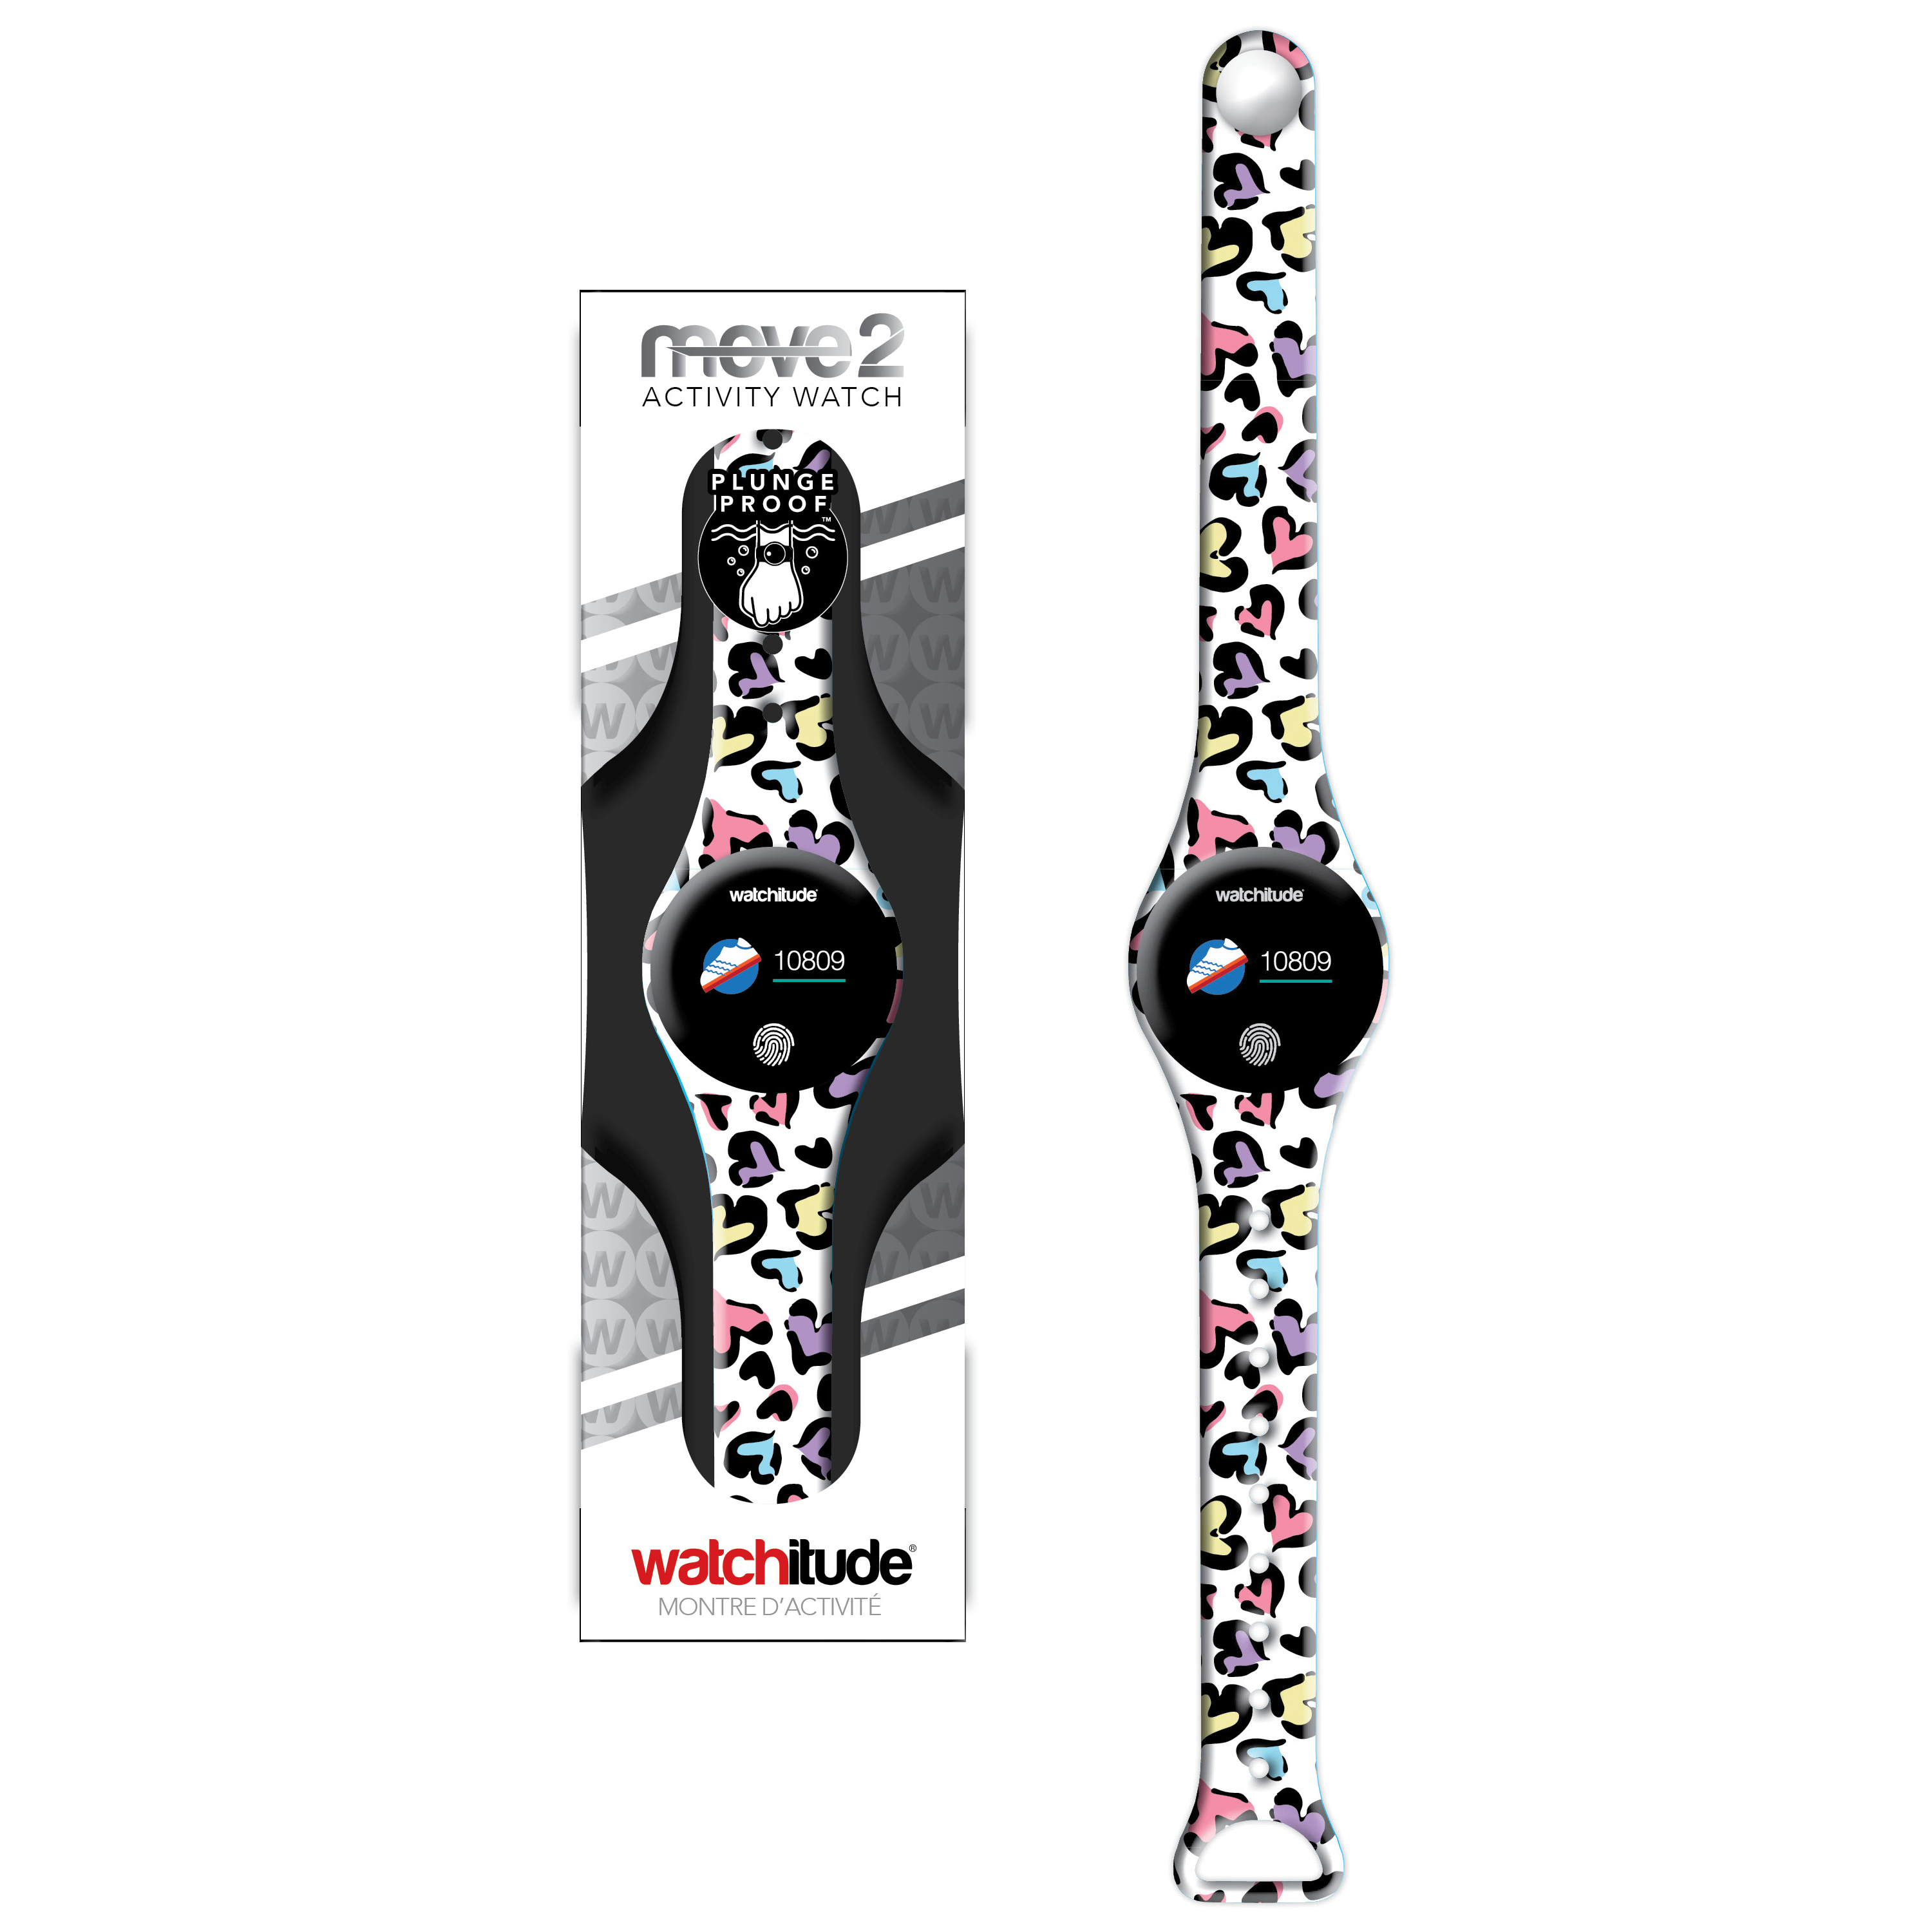 Painted Hearts - Watchitude Move 2 - Kids Activity Plunge Proof Watch